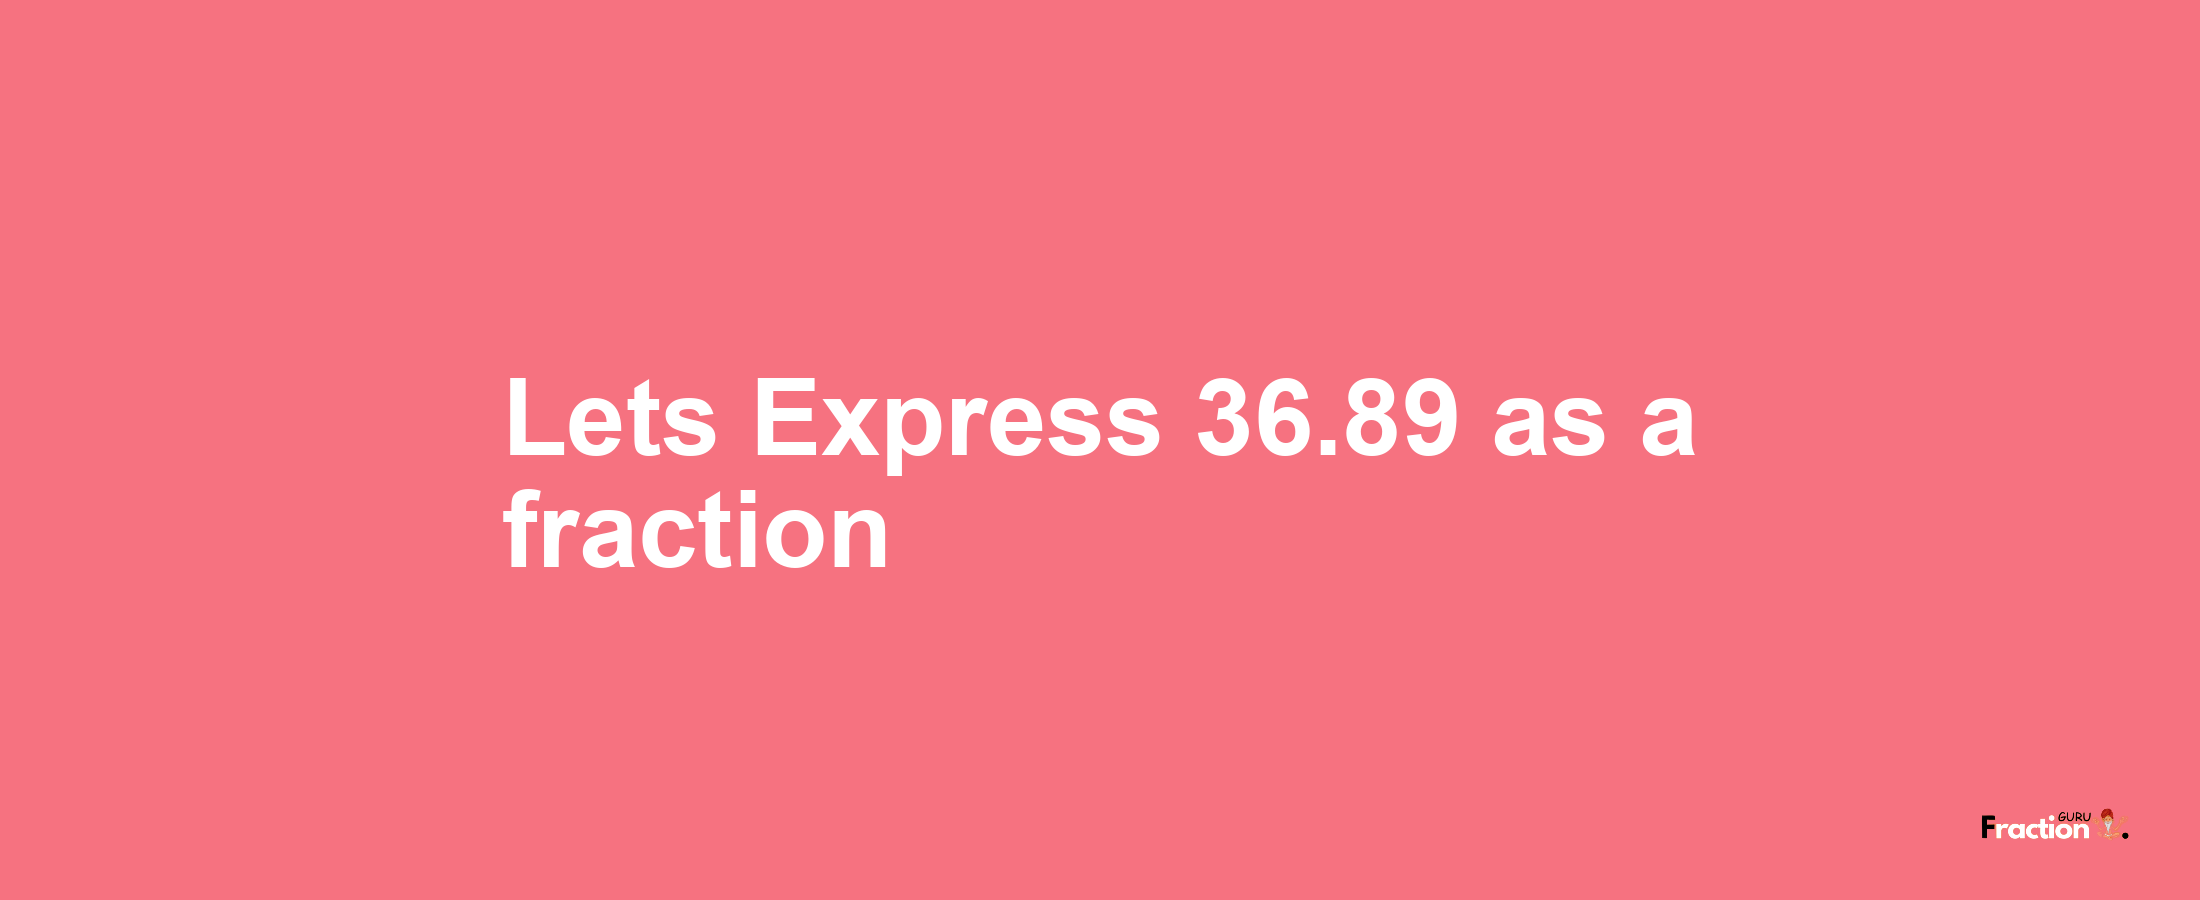 Lets Express 36.89 as afraction